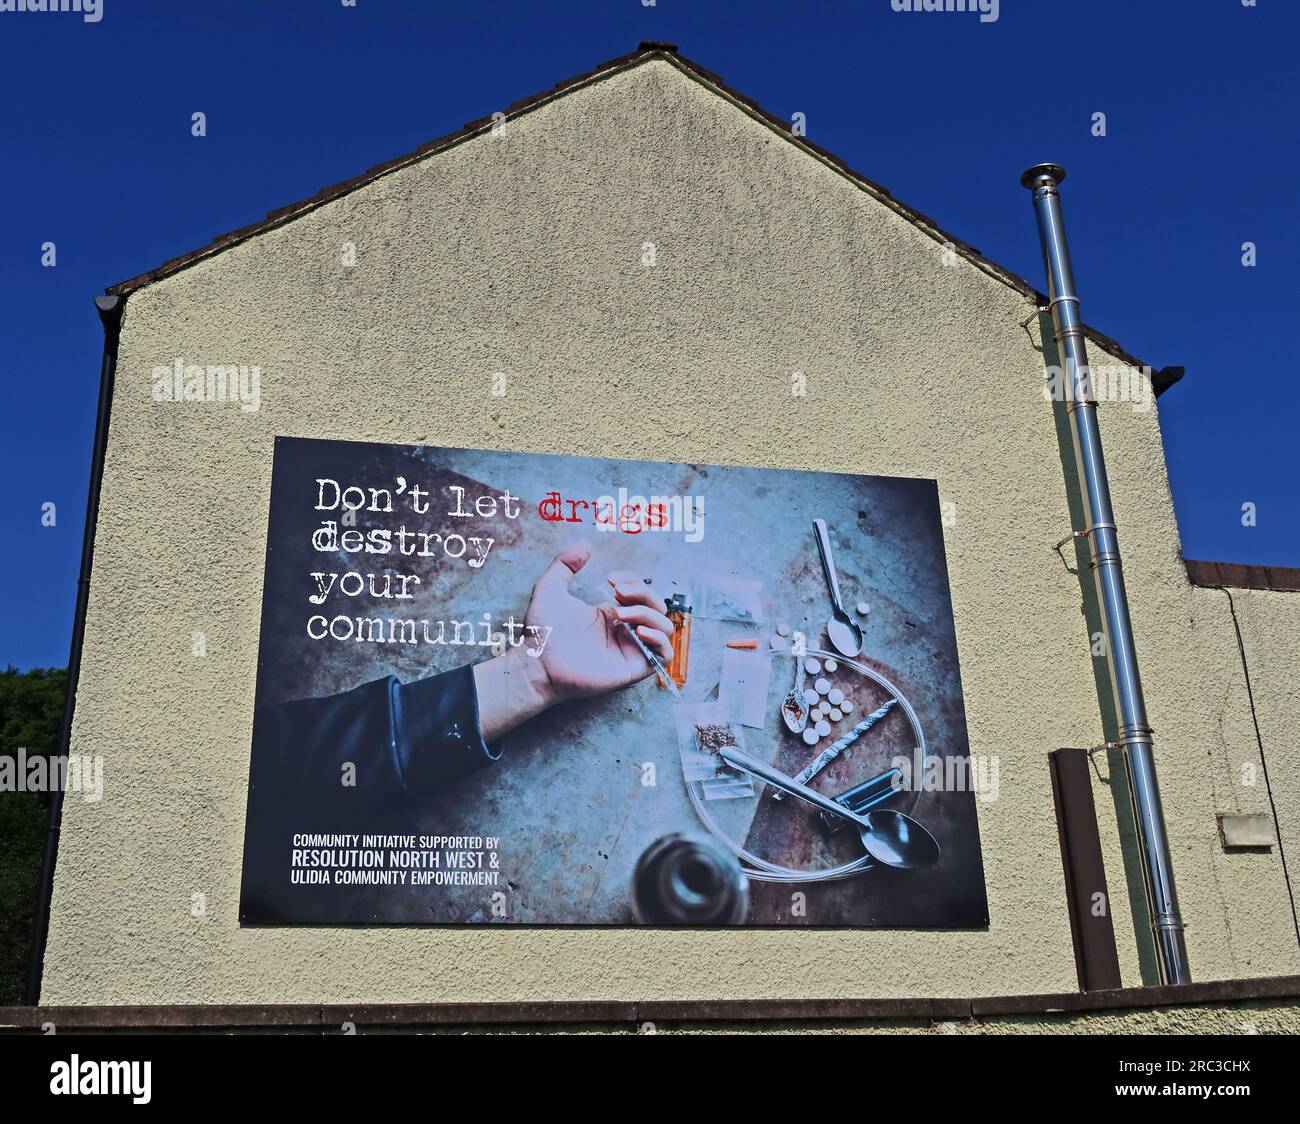 Don't let drugs destroy your community mural - initiative supported by Resolution North West, Ulidia community empowerment - Bushmills, NI, UK Stock Photo